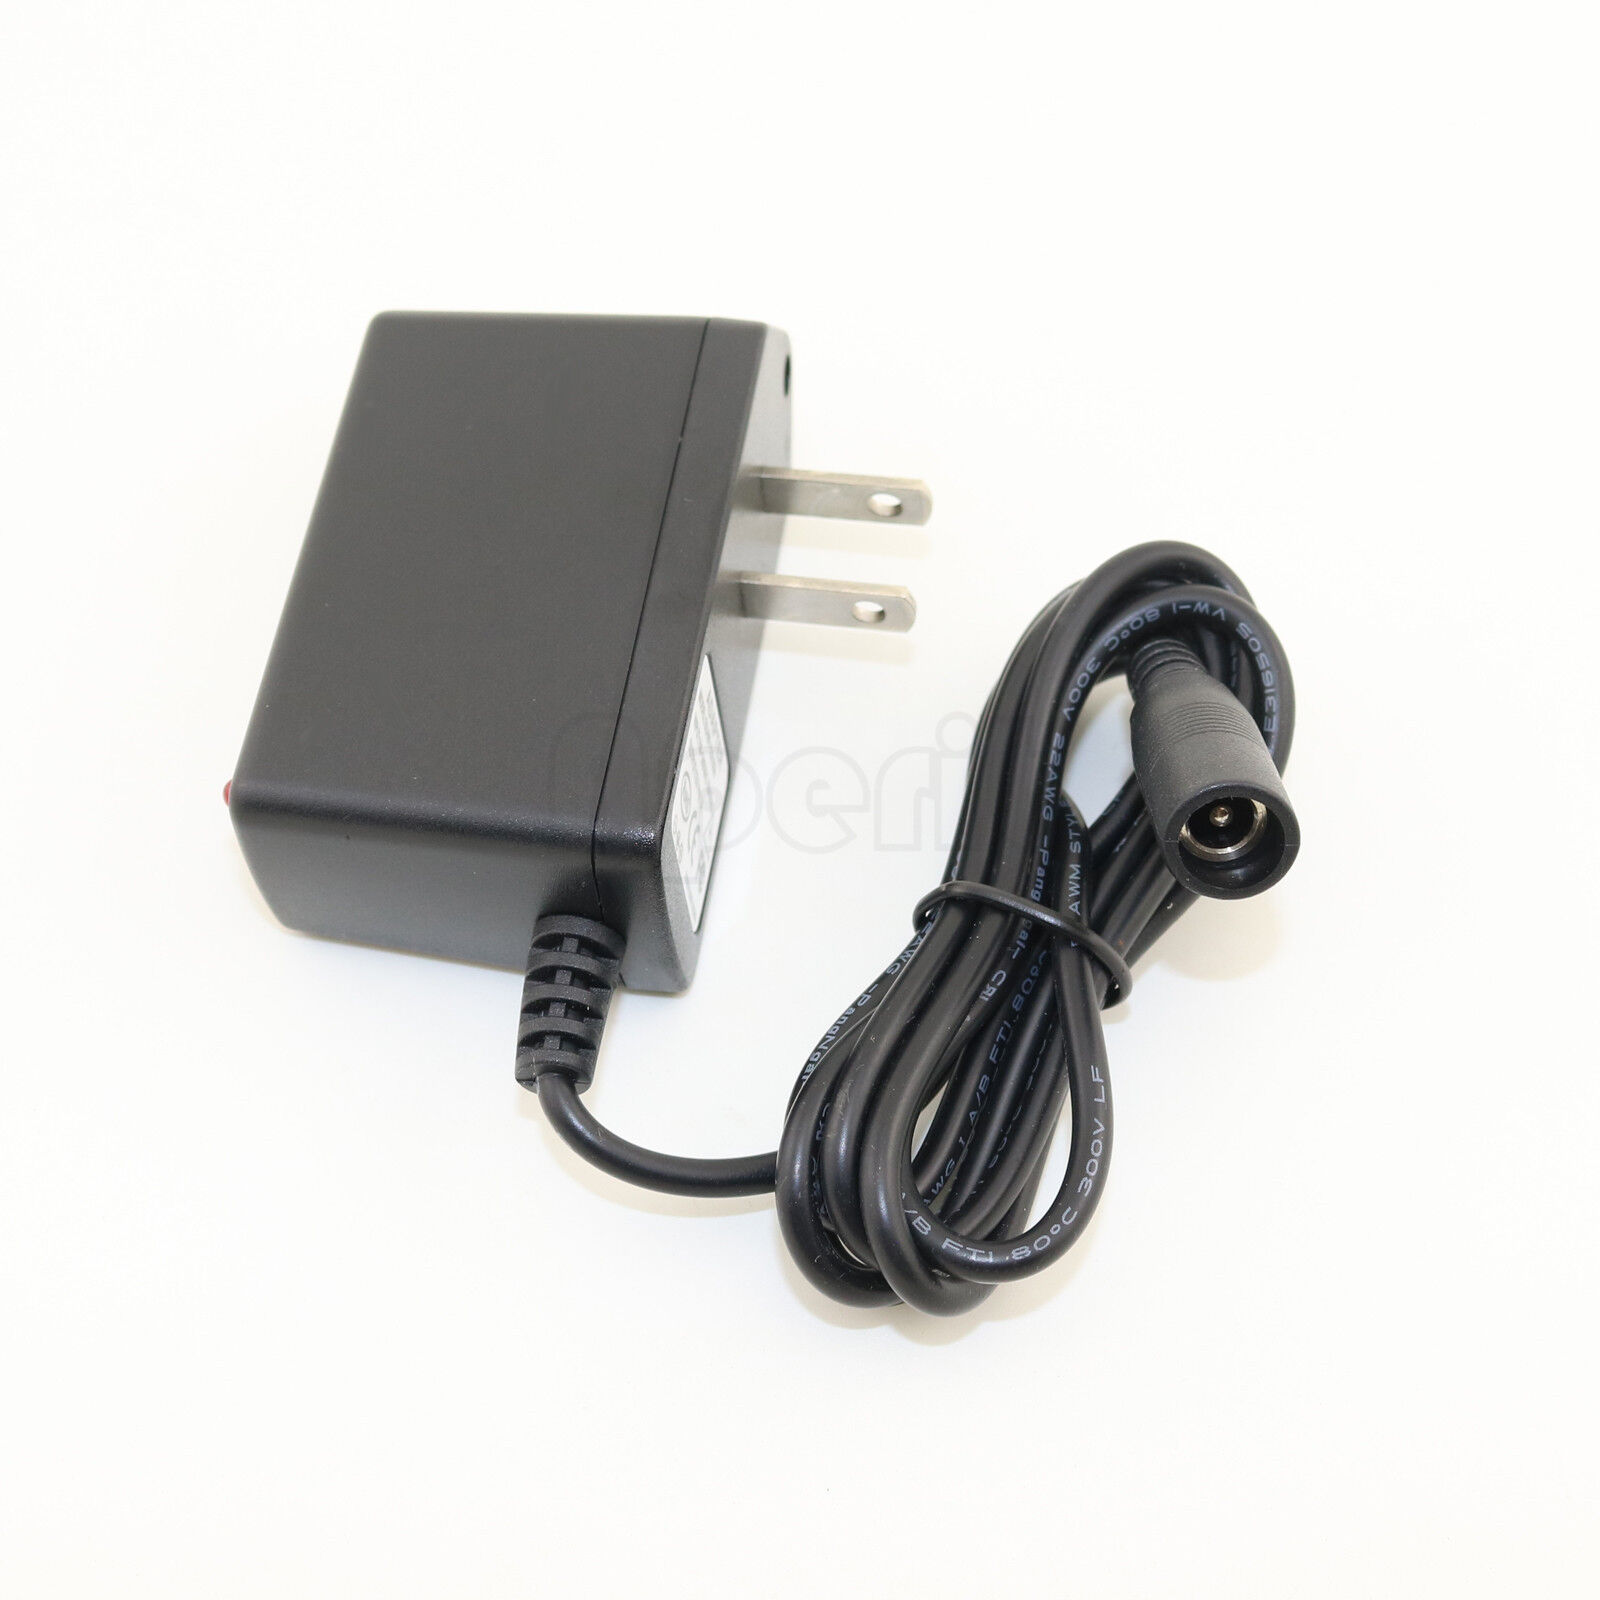 12V AC DC Adaptor Power Supply Charger Cord for AS501 Dell Monitor Soundbar 1A 12V AC DC Adaptor Power Supply Charger C